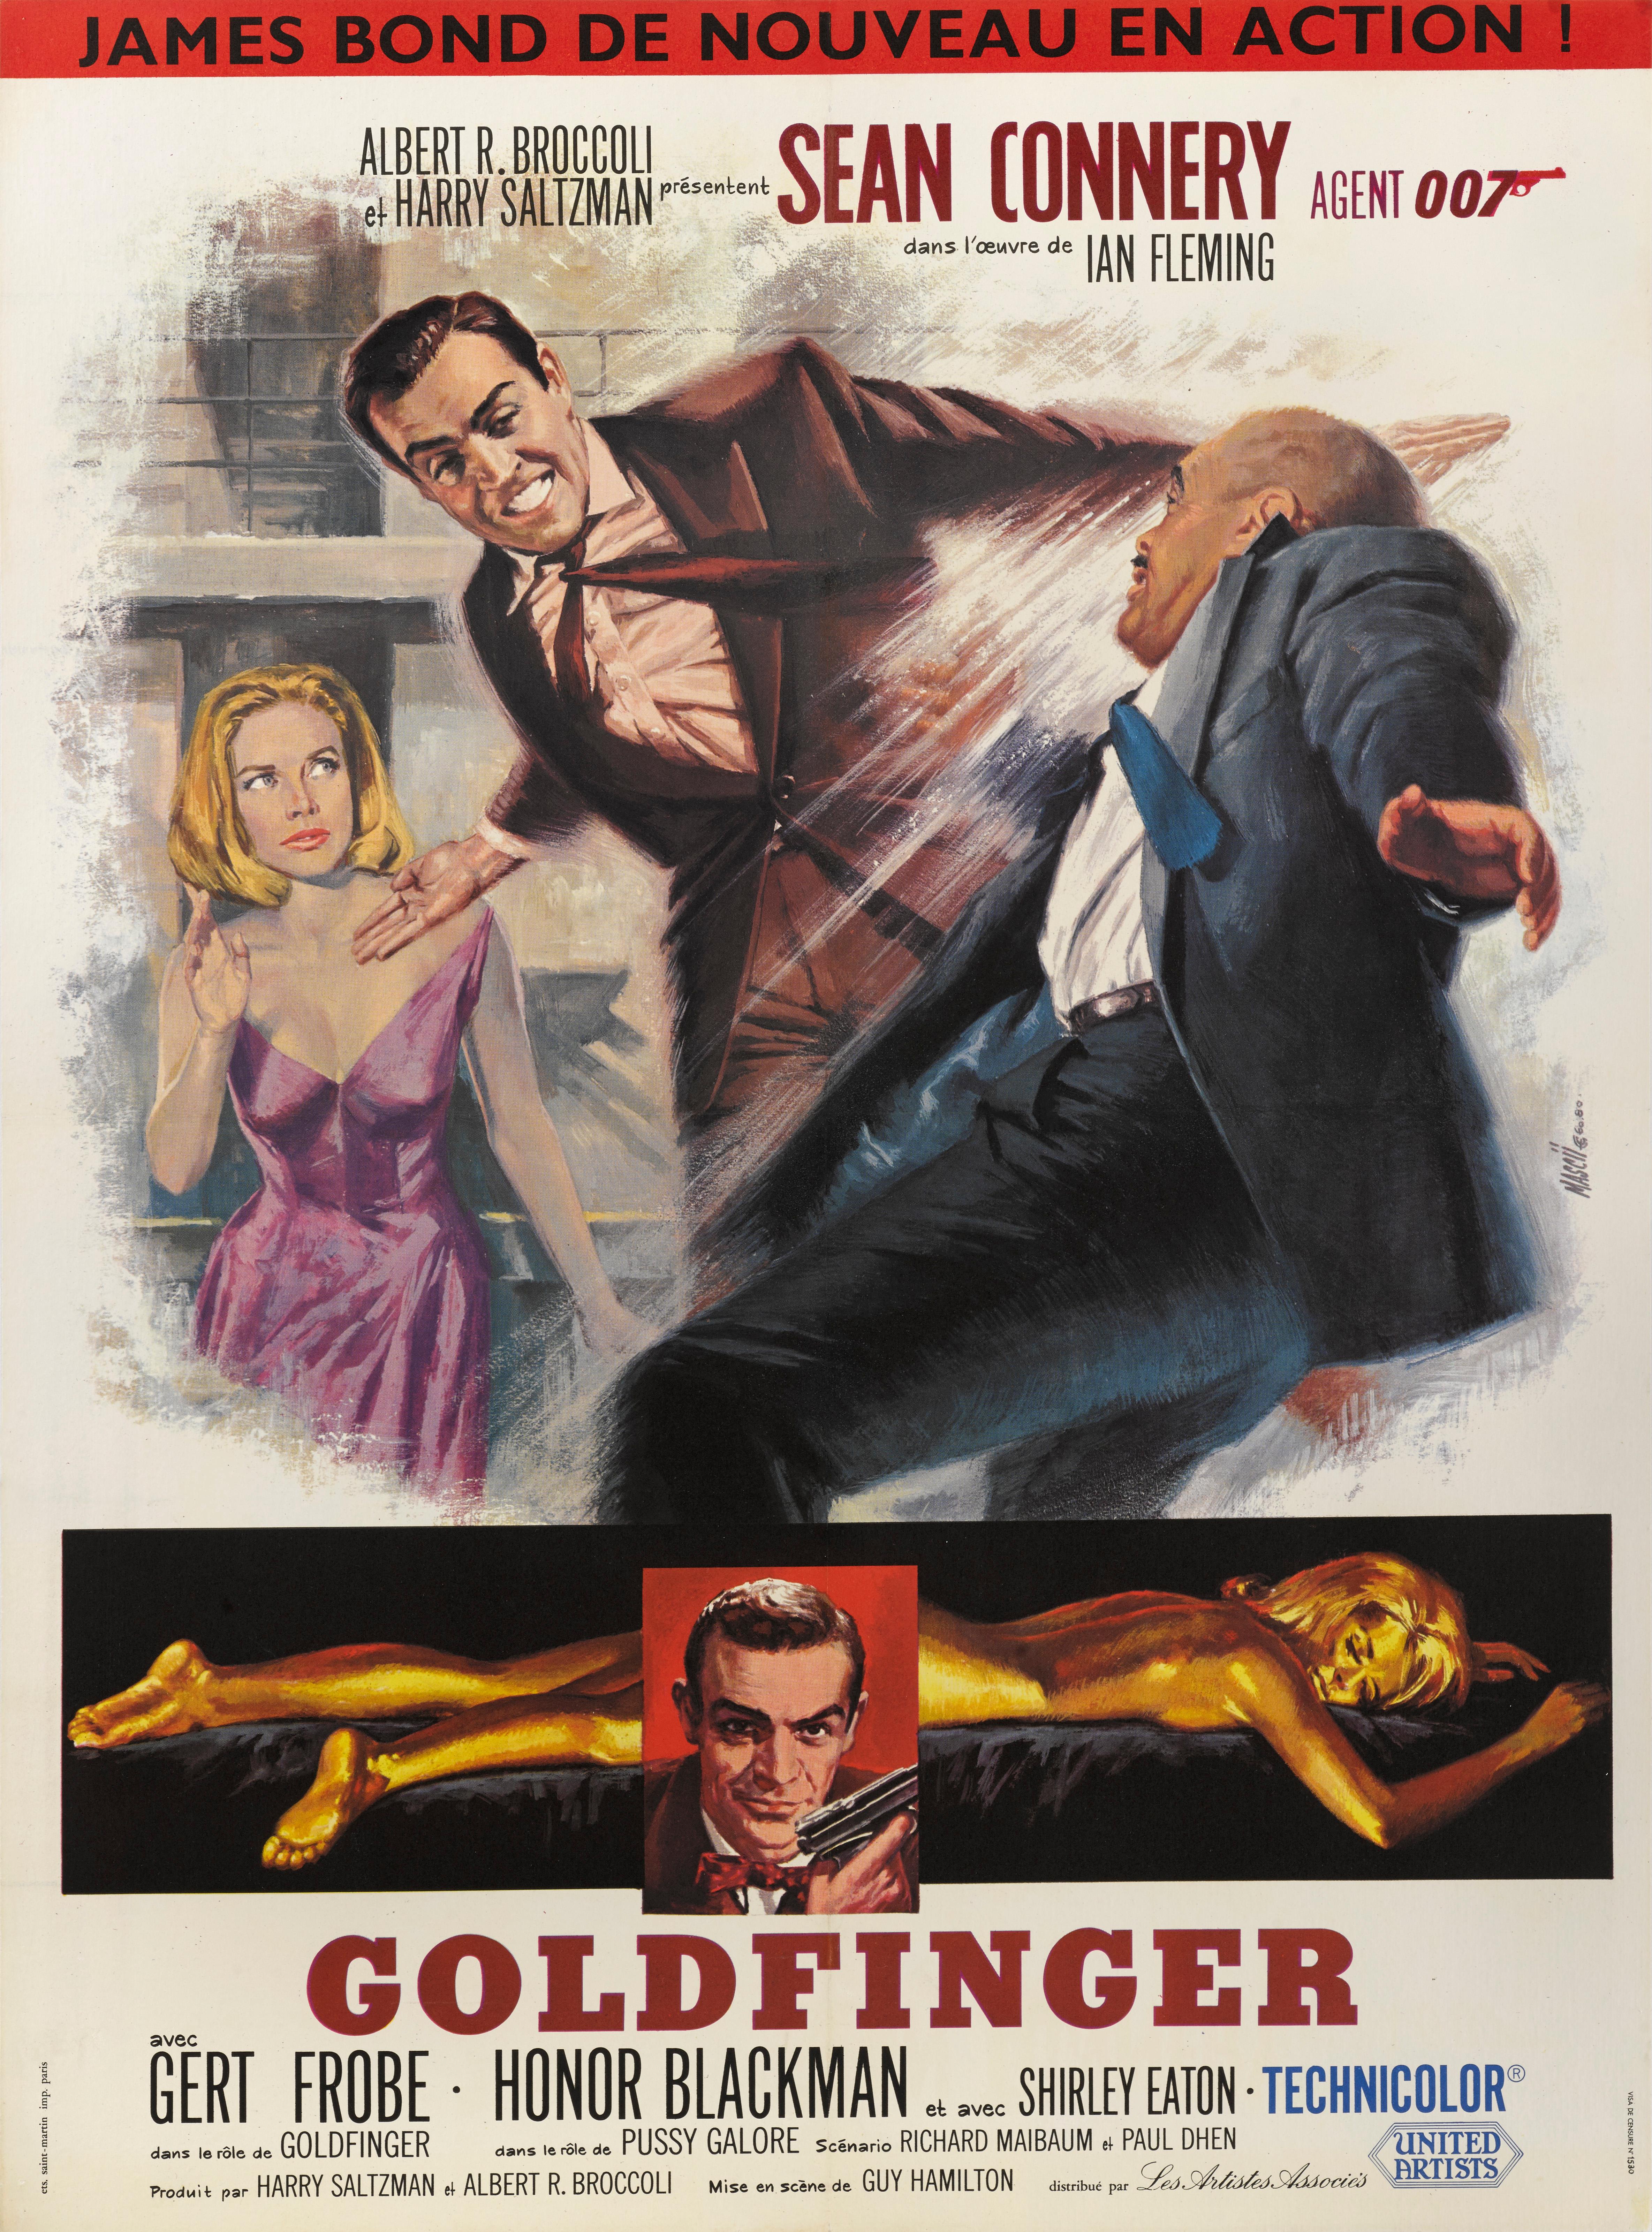 Original French film poster
This poster would have been used outside the cinema at the films original release.
Goldfinger was the third James Bond film and the third to star Sean Connery as the fictional MI6 agent James Bond. The artwork on this